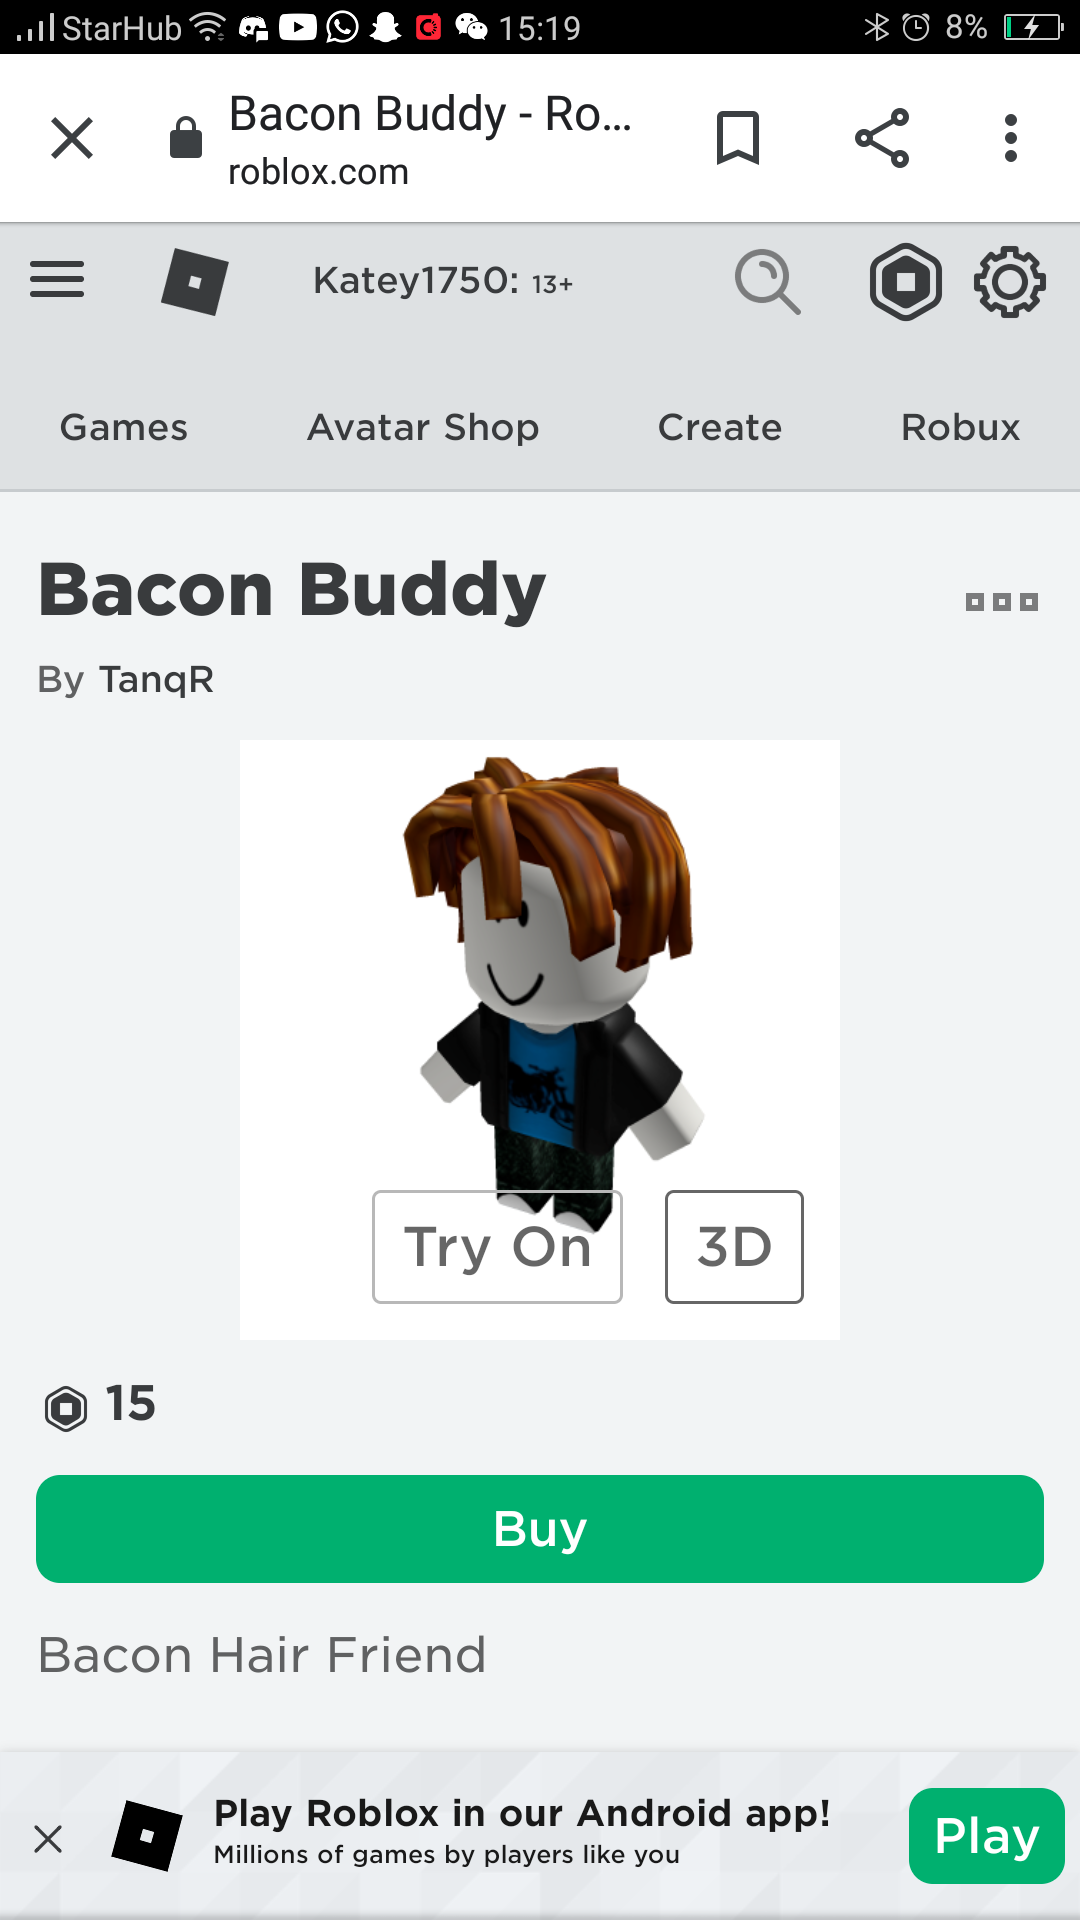 Name of the clothes and pants this bacon man is wearing?